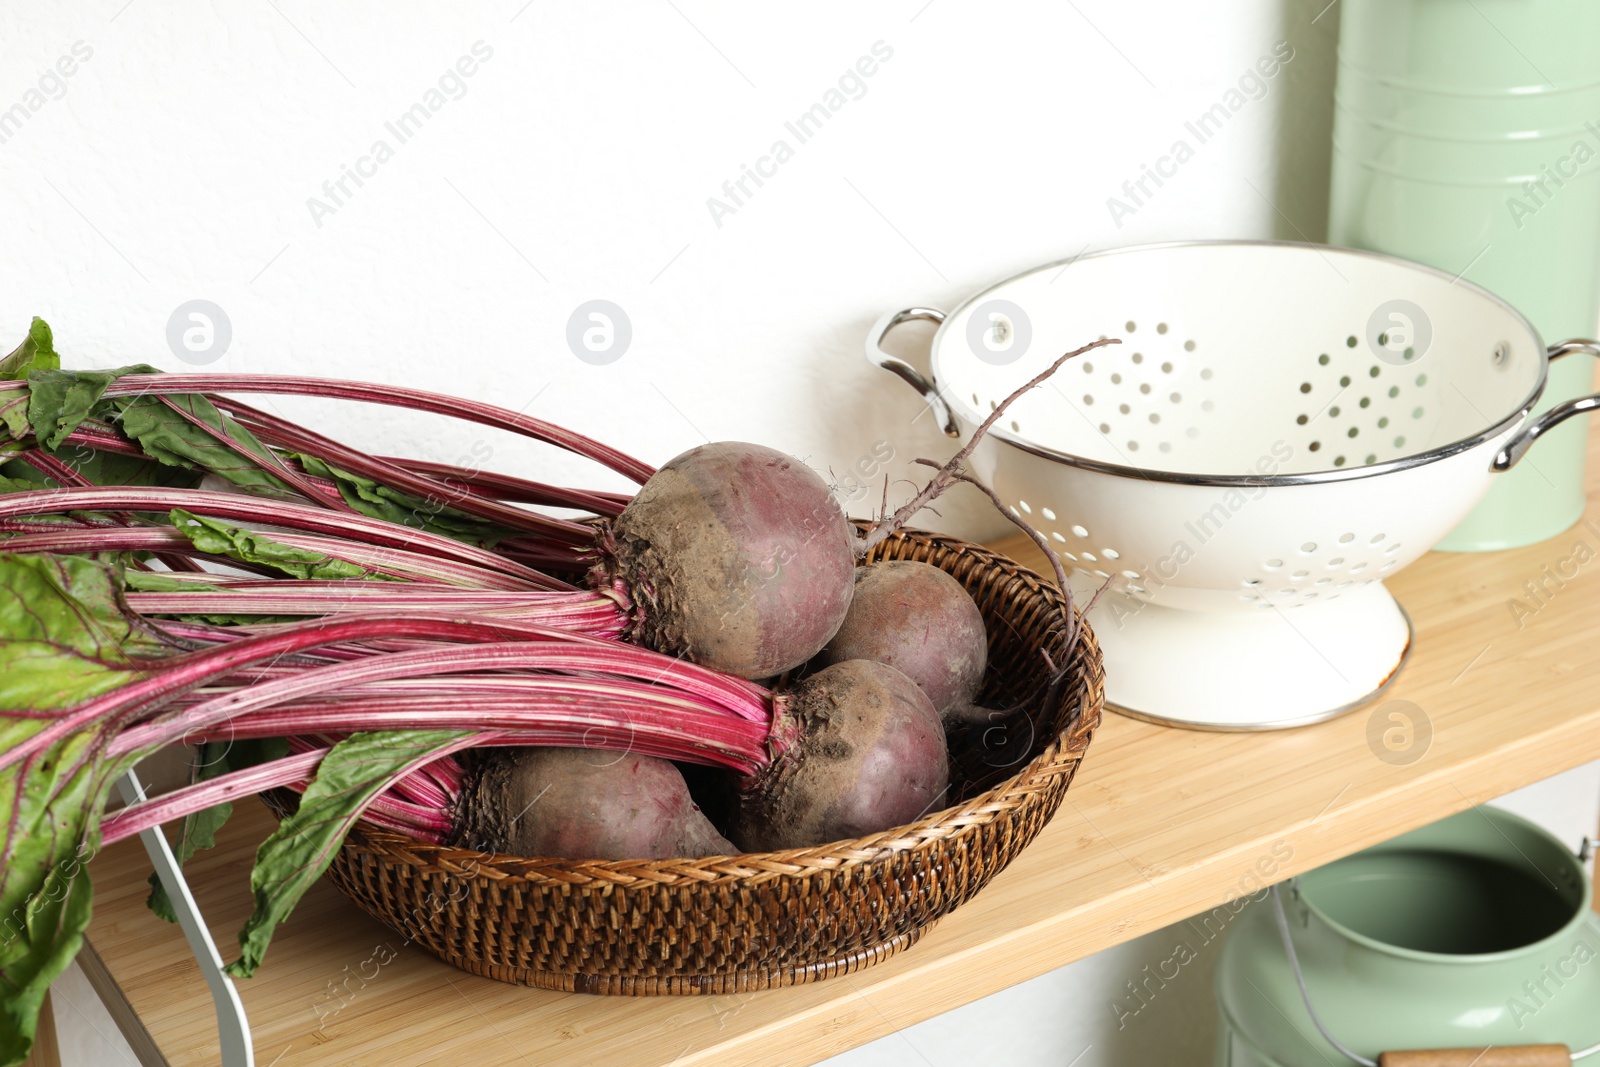 Photo of Raw ripe beets in wicker bowl on shelf indoors